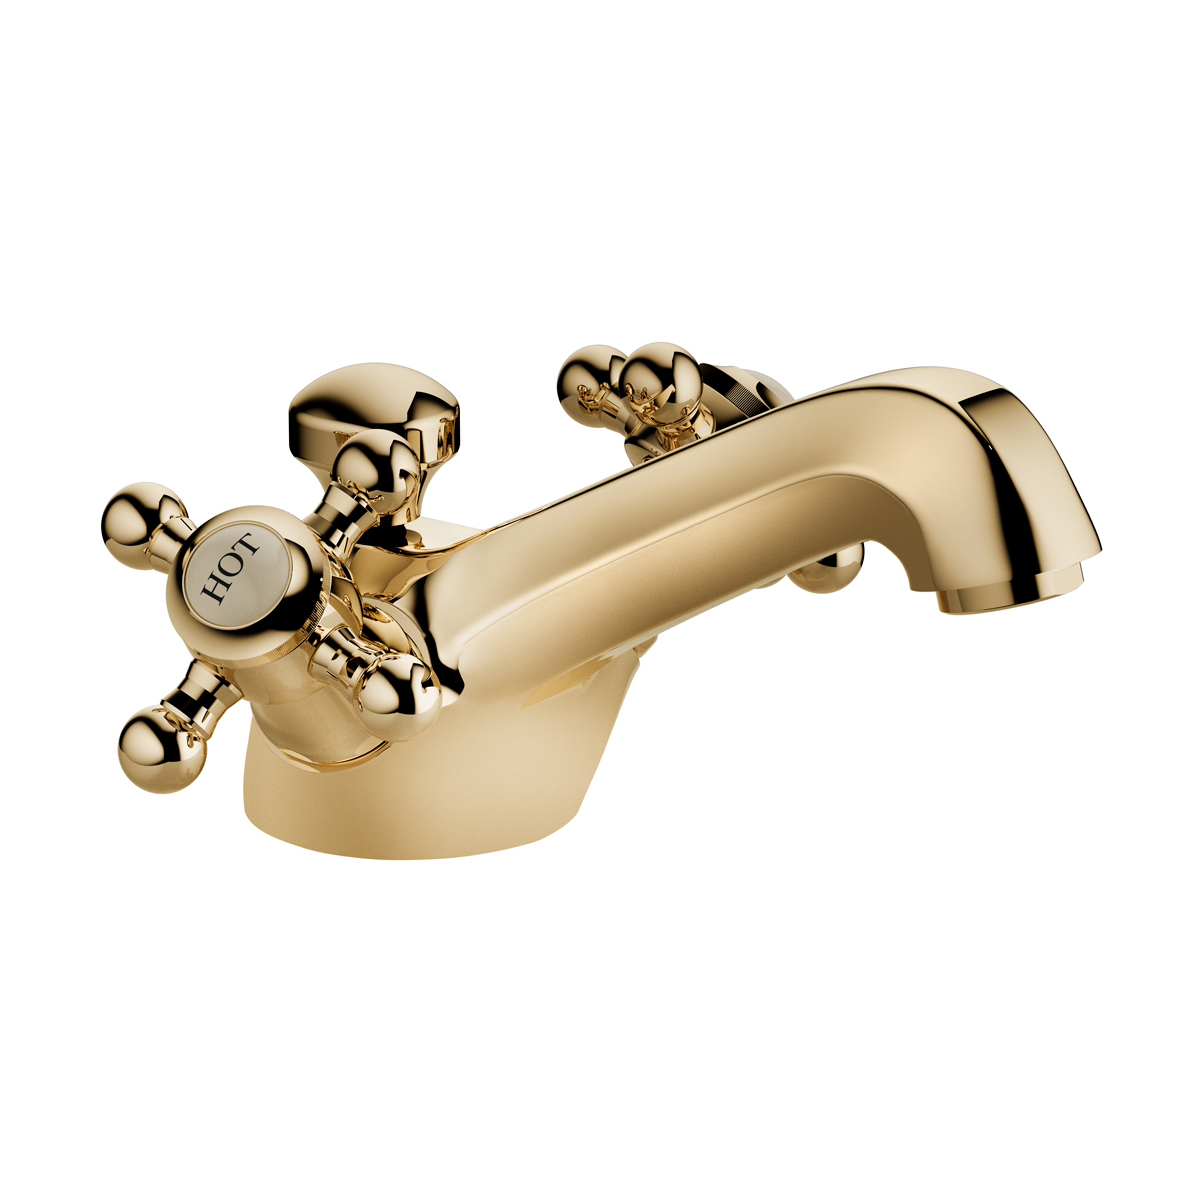 Madison Single Hole Lavatory Faucet in Brass w/Pop-Up